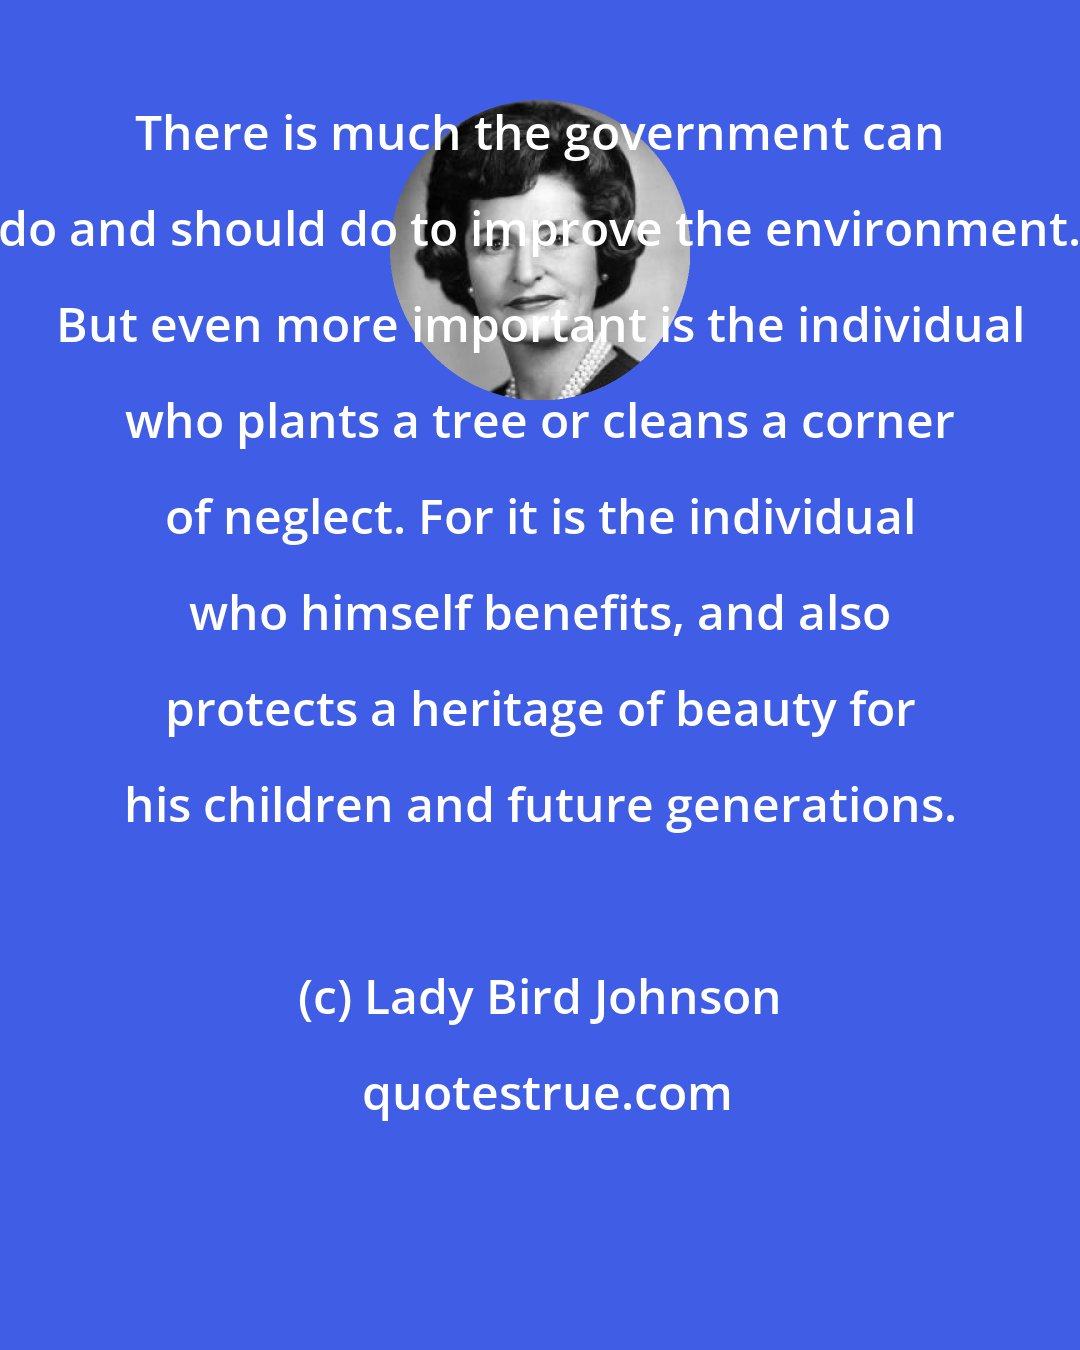 Lady Bird Johnson: There is much the government can do and should do to improve the environment. But even more important is the individual who plants a tree or cleans a corner of neglect. For it is the individual who himself benefits, and also protects a heritage of beauty for his children and future generations.